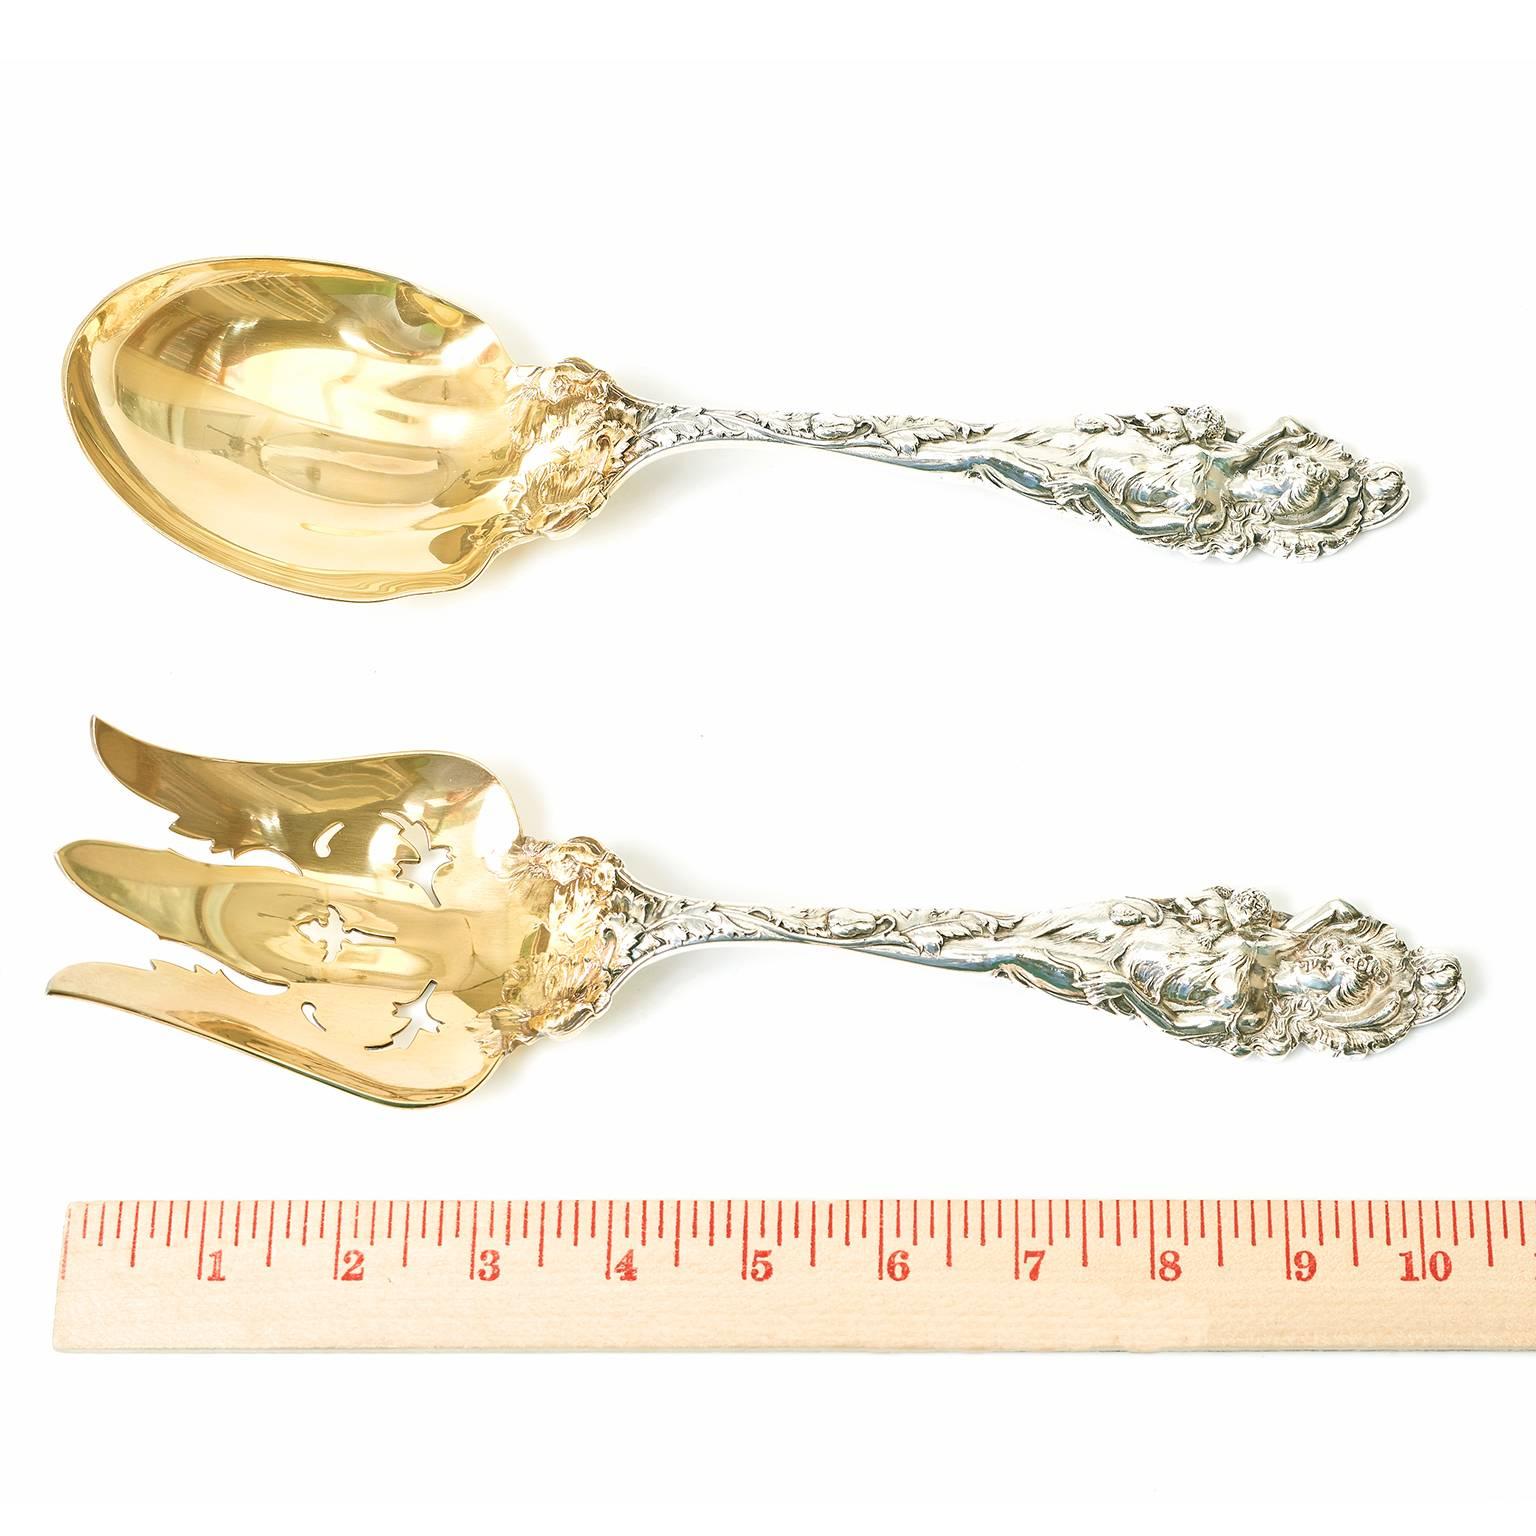 Early 20th Century Reed & Barton “Love Disarmed” Gilded Sterling Serving Fork and Spoon